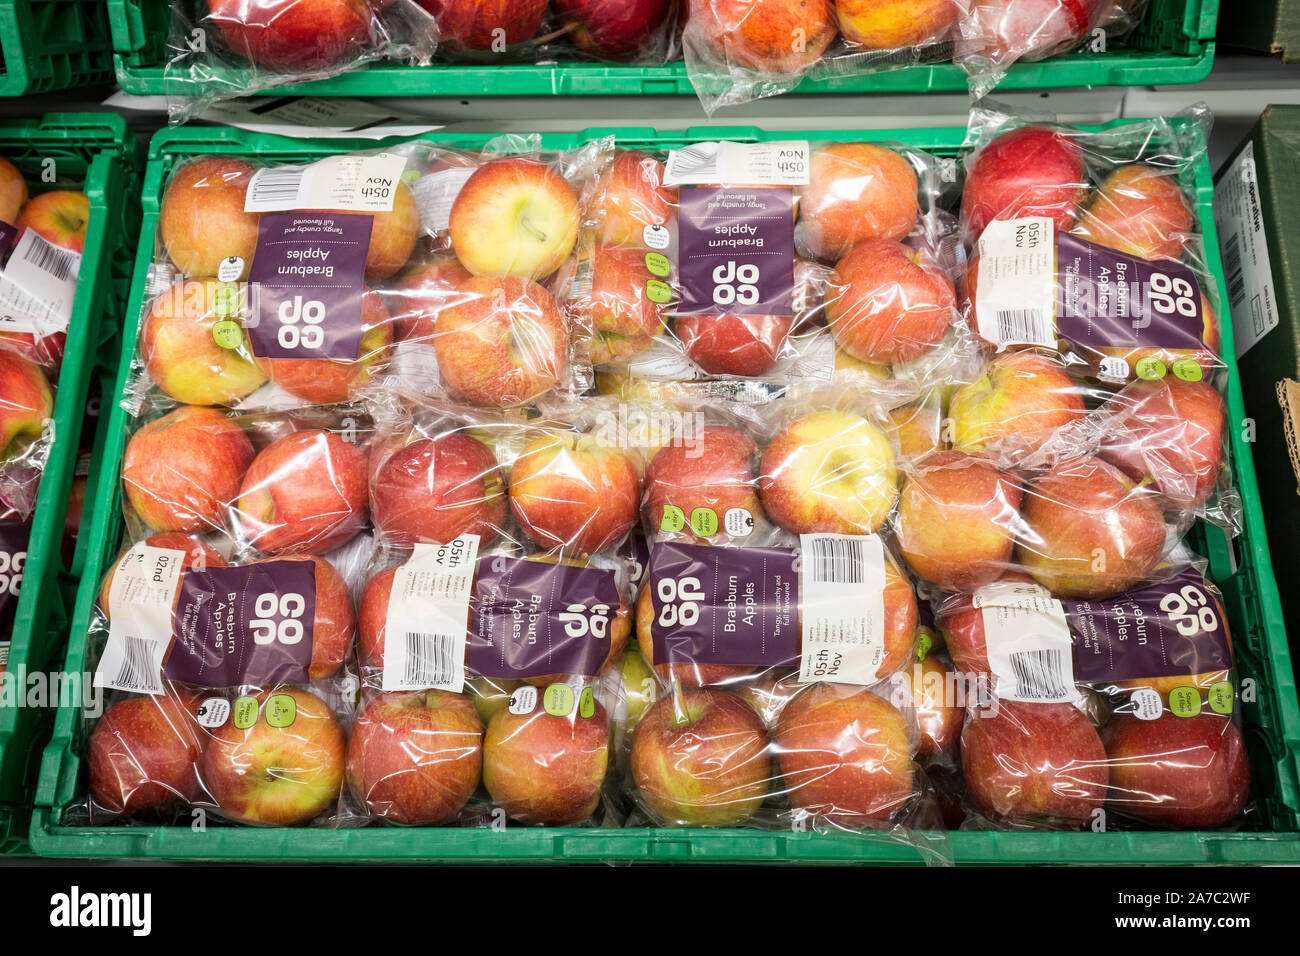 Pictures at a Co-Op food store. Braeburn apples in plastic bags. Stock Photo